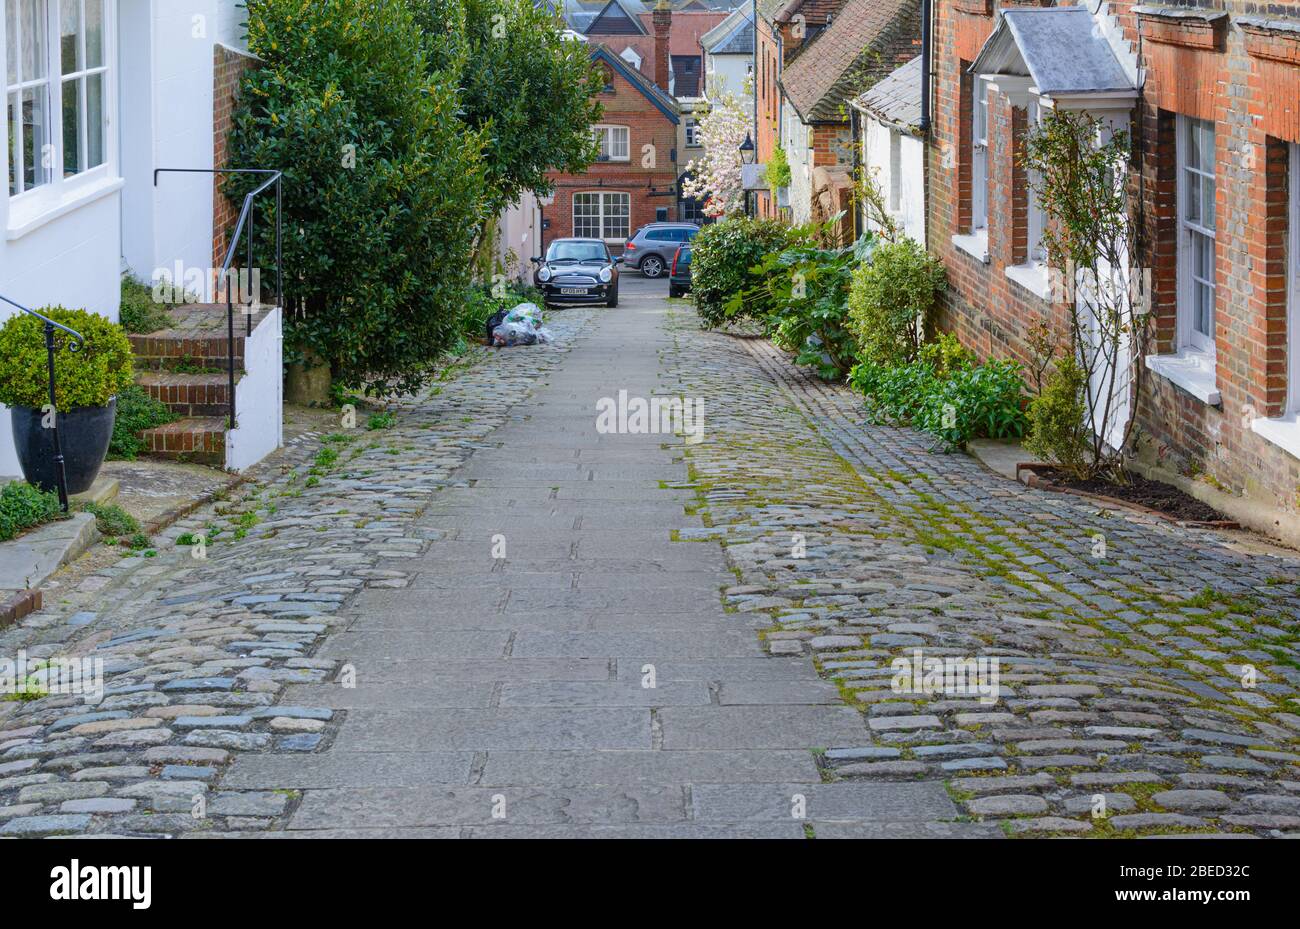 Bakers Arms Hill, a historic cobbled street on a steep hill in the historic market town on Arundel, West Sussex, England, UK. Stock Photo